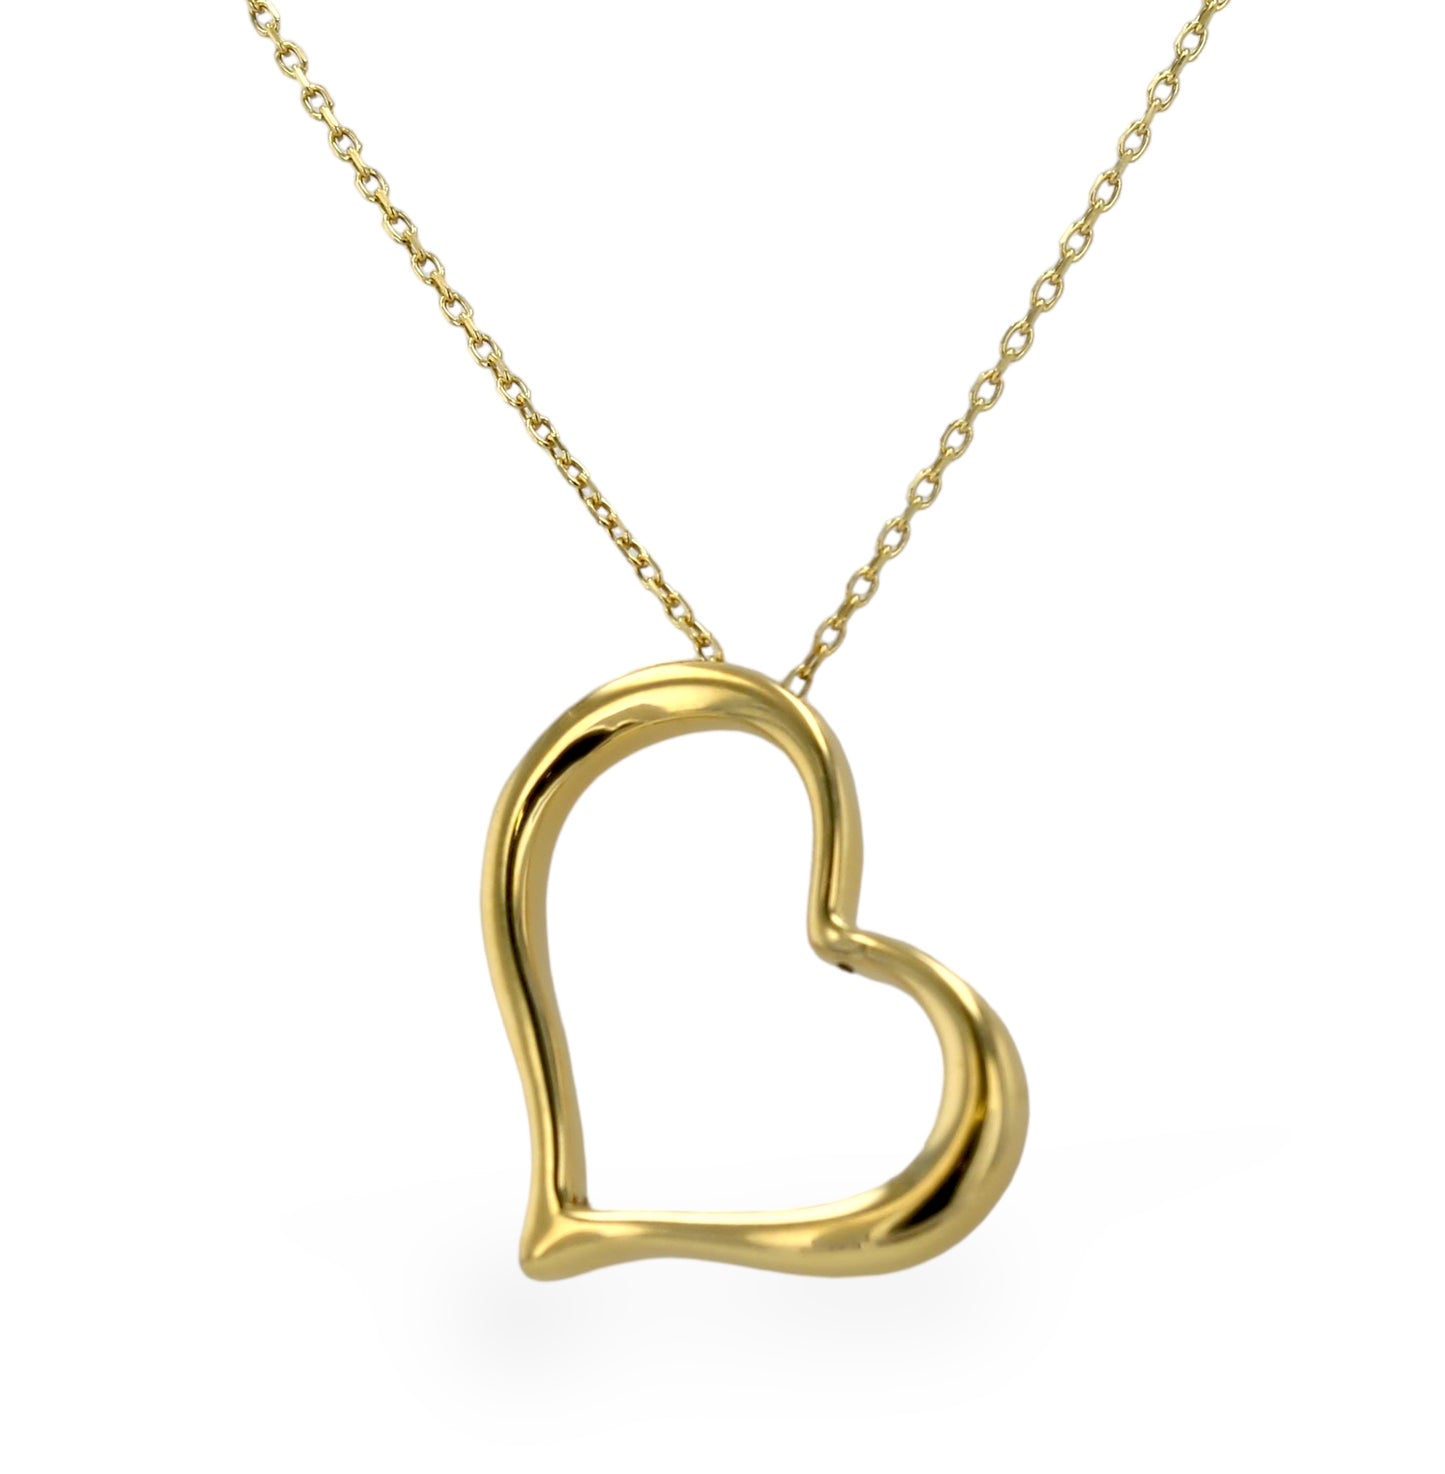 10K yellow gold heart Necklace -226122